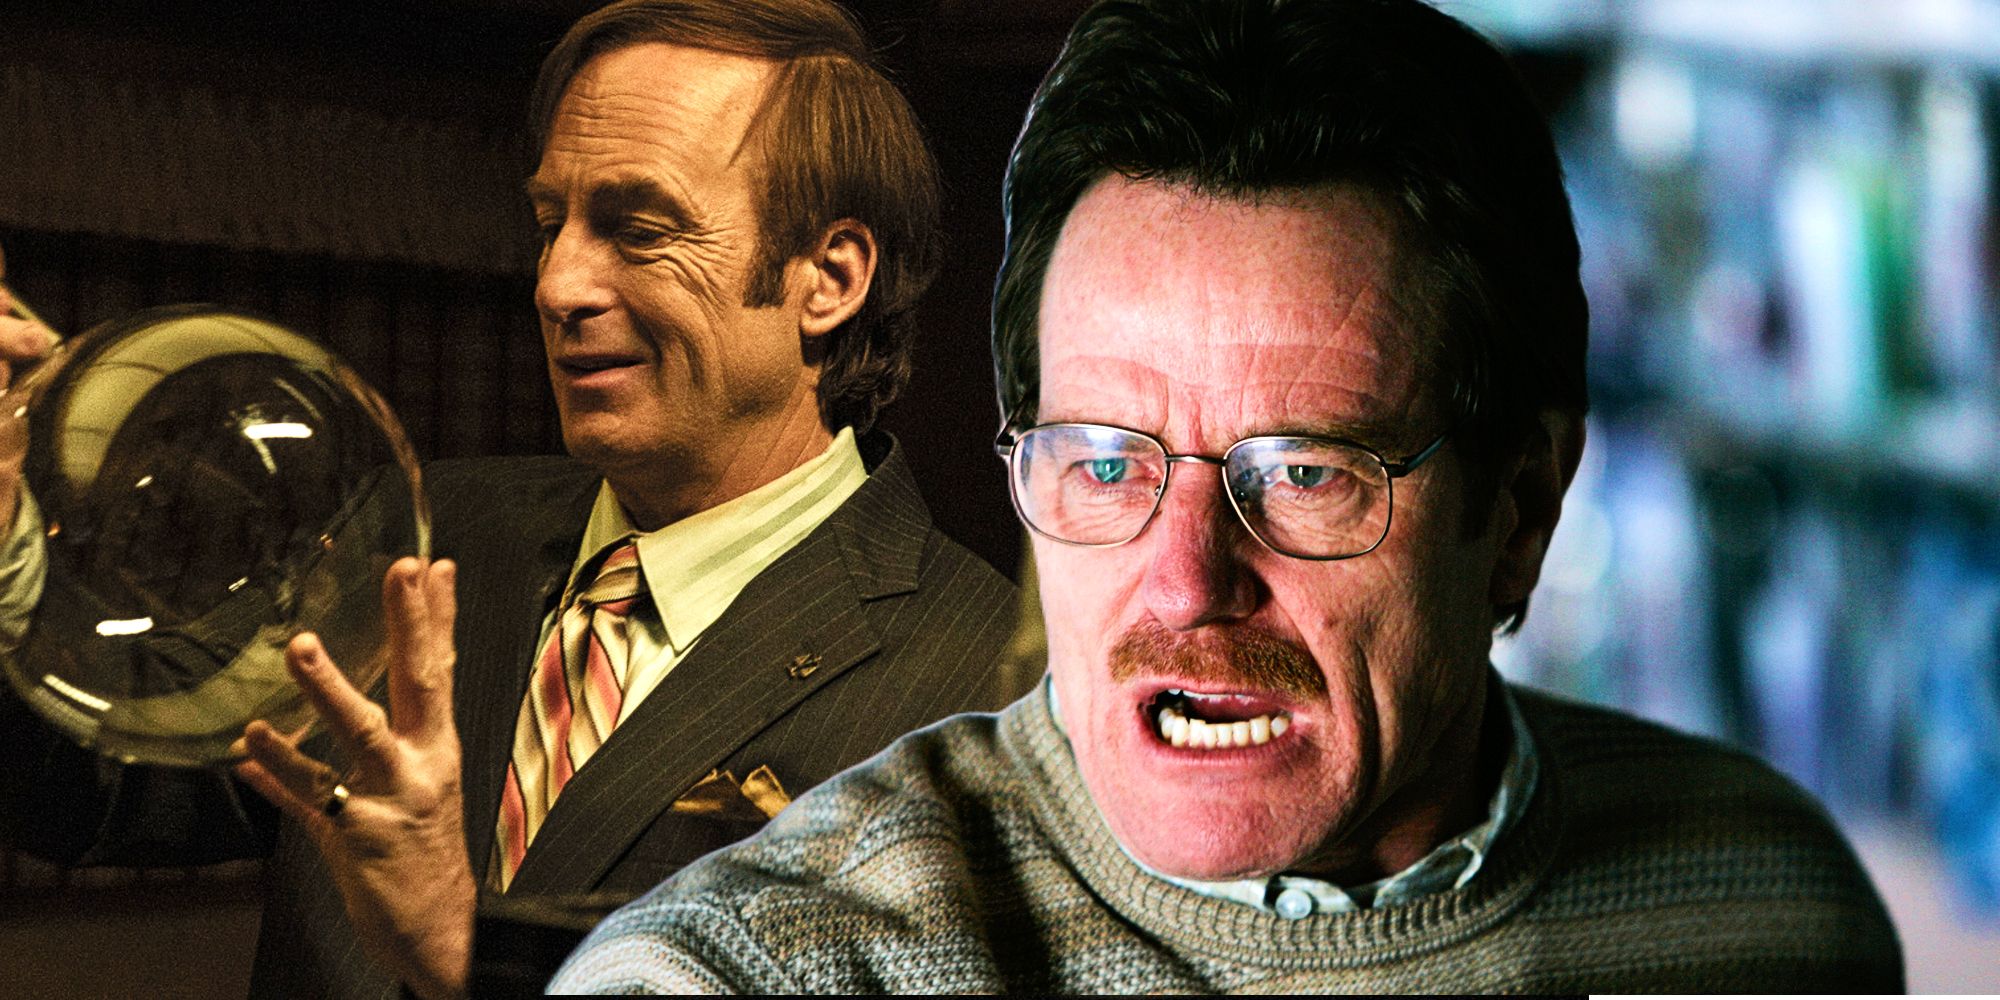 Bob Odenkirk as Saul Goodman in Better Call Saul and Bryan Cranston as Walter White in Breaking Bad